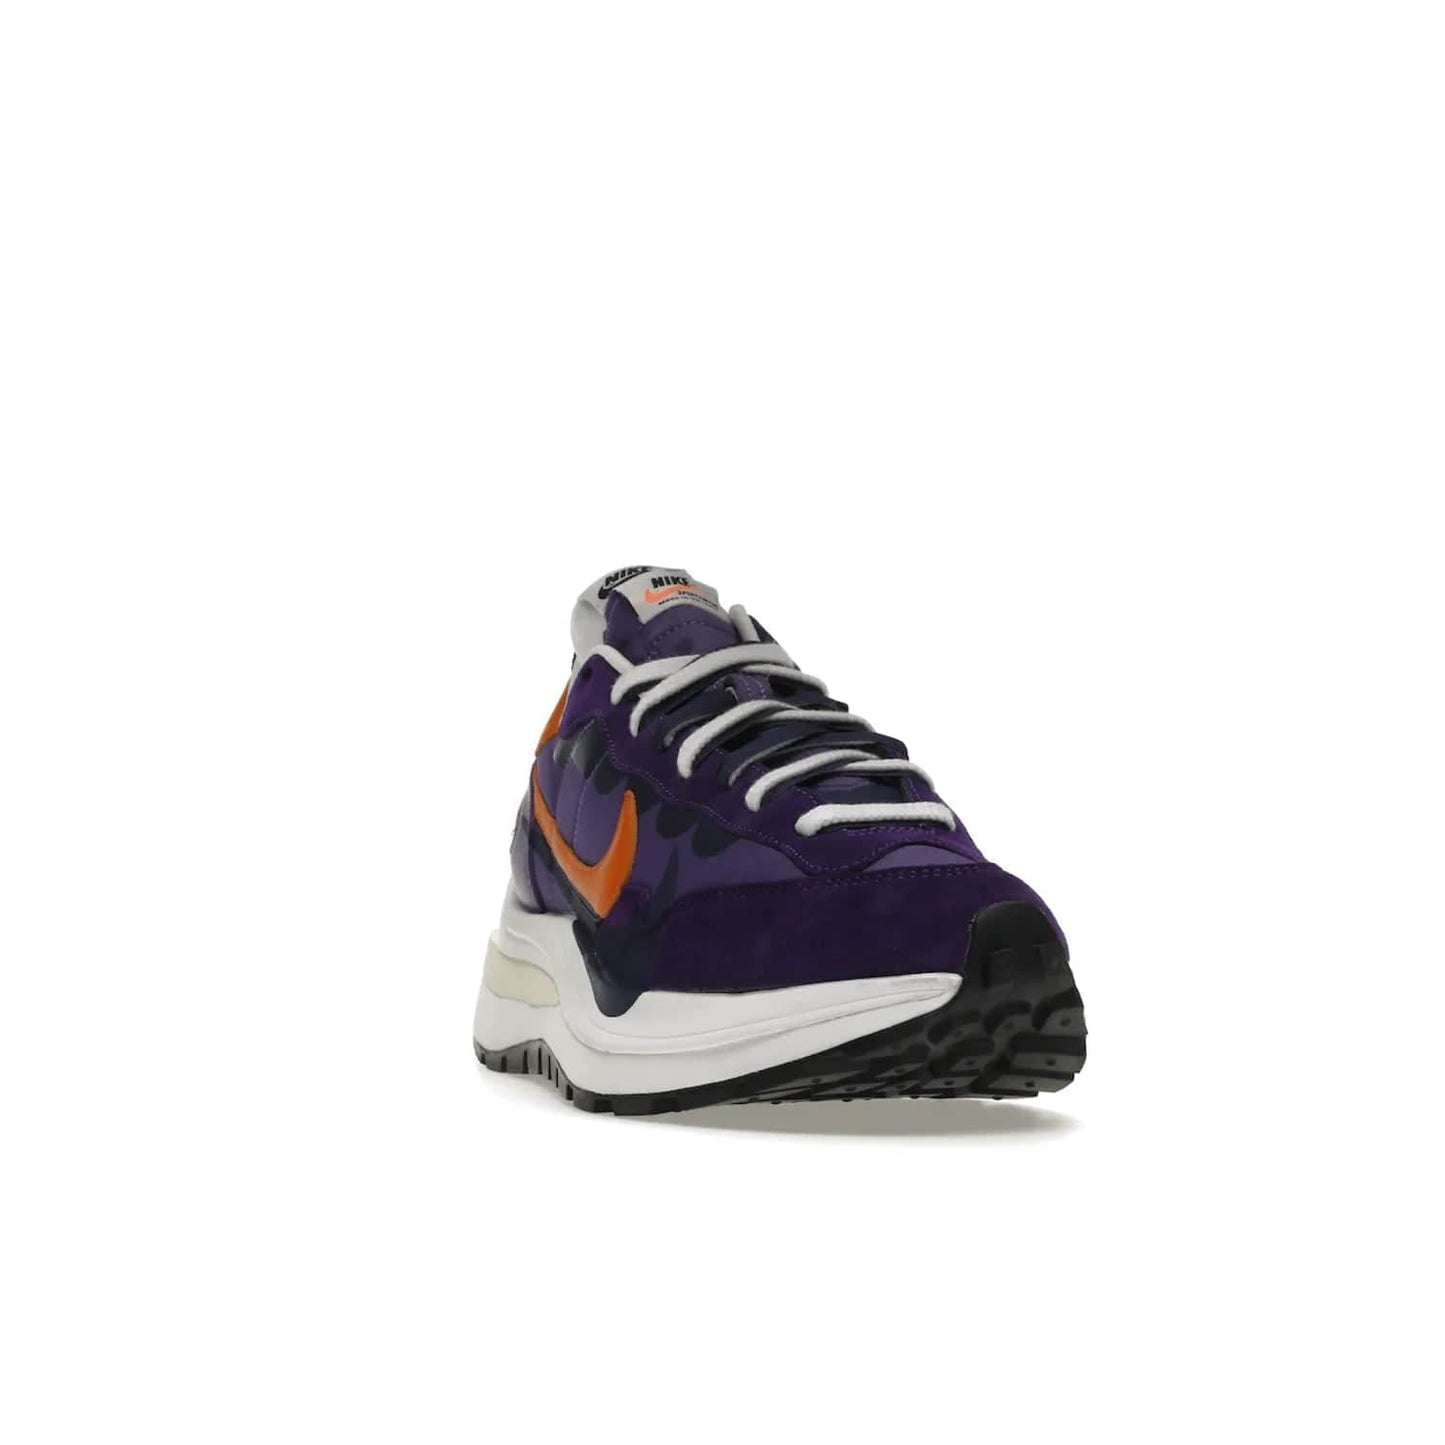 Nike Vaporwaffle sacai Dark Iris - Image 8 - Only at www.BallersClubKickz.com - Unique Nike Vaporwaffle sacai Dark Iris collab. Suede, leather & textile upper with Orange accents. Dual tongues & midsoles. Woven labels & heel tabs branding. Colorway of Purple, Orange, White & Black. Must-have for any wardrobe.